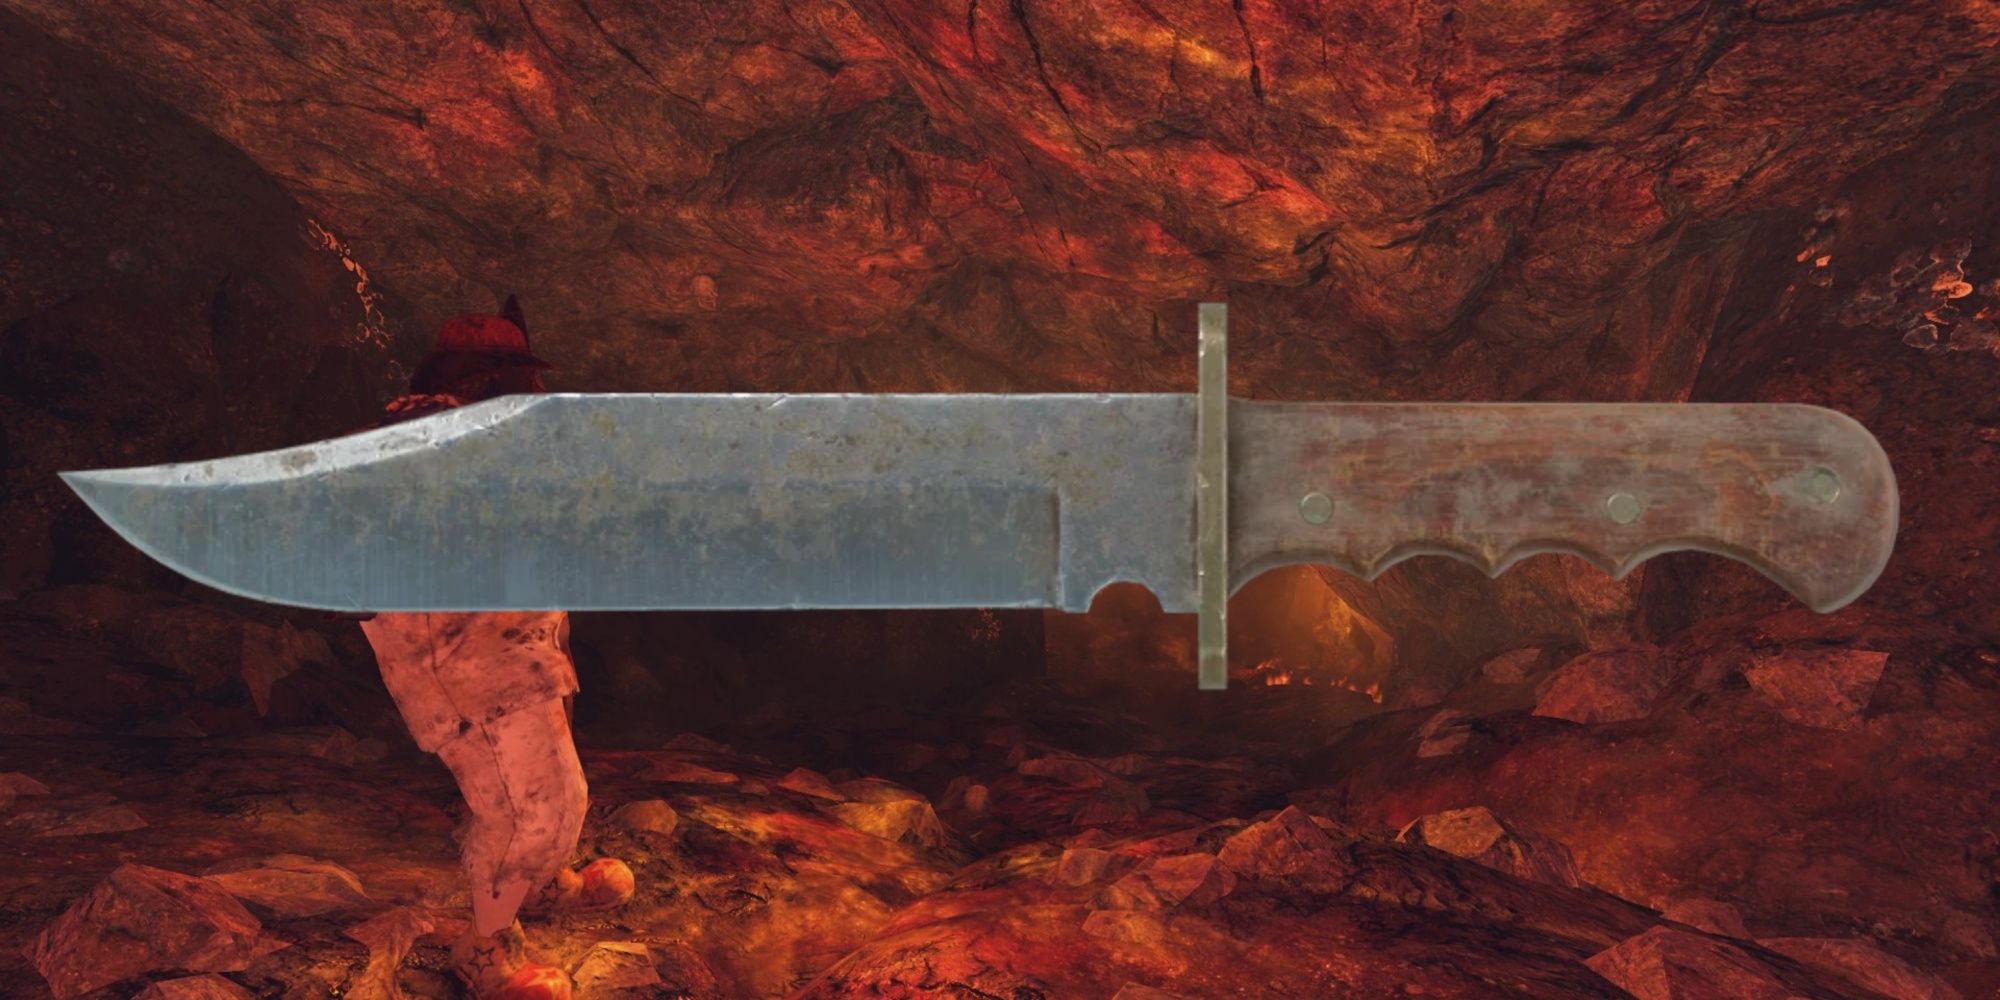 Bowie Knife Melee Weapon In Fallout 76